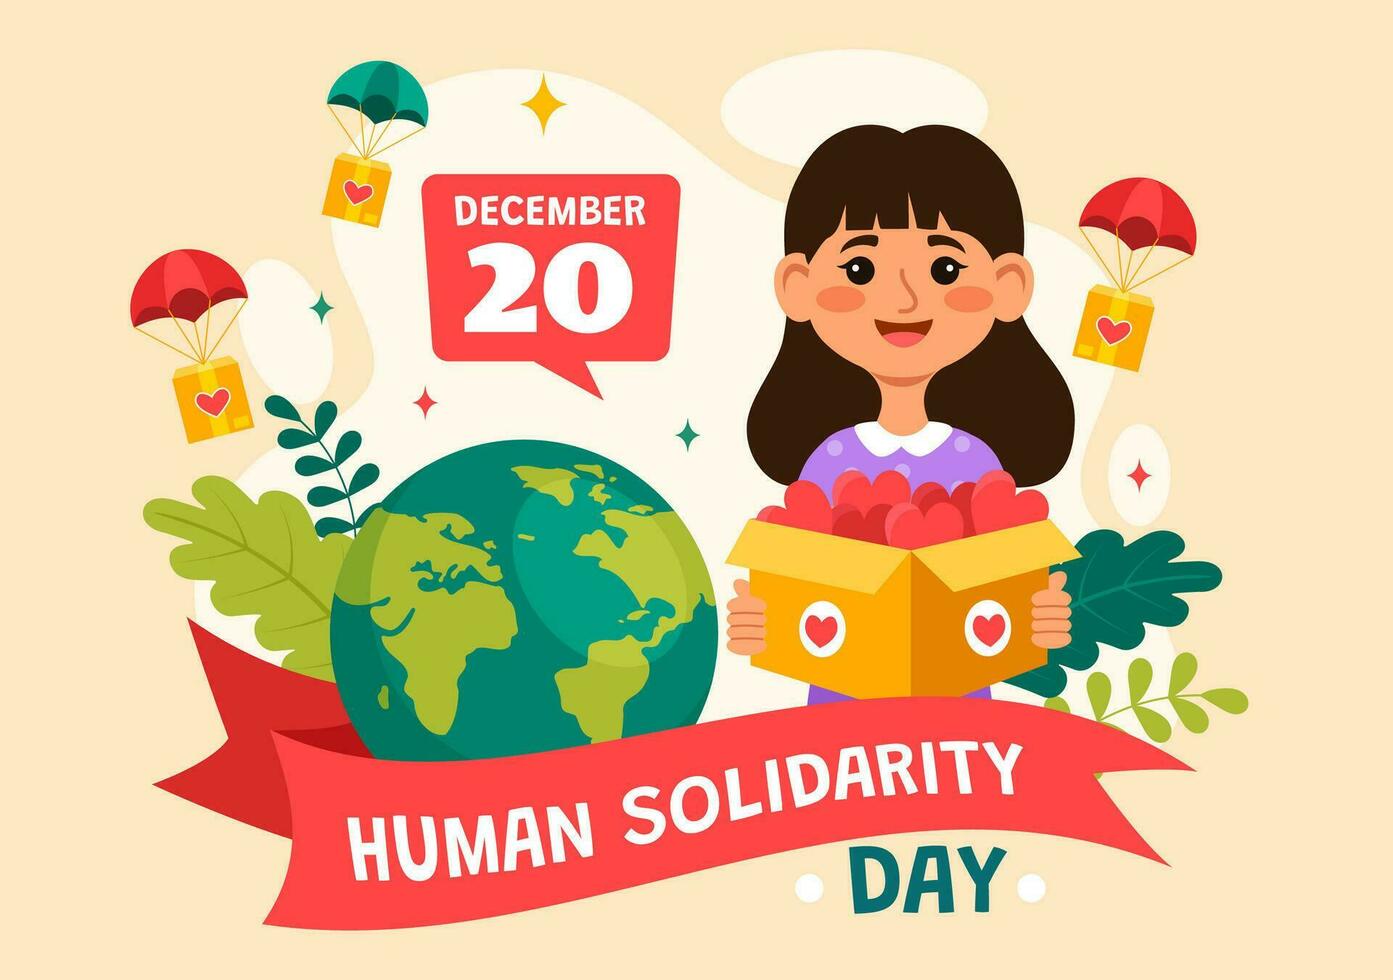 International Human Solidarity Day Vector Illustration on December 20 with Earth, Hands and Love for People Help Person in Kids Cartoon Background